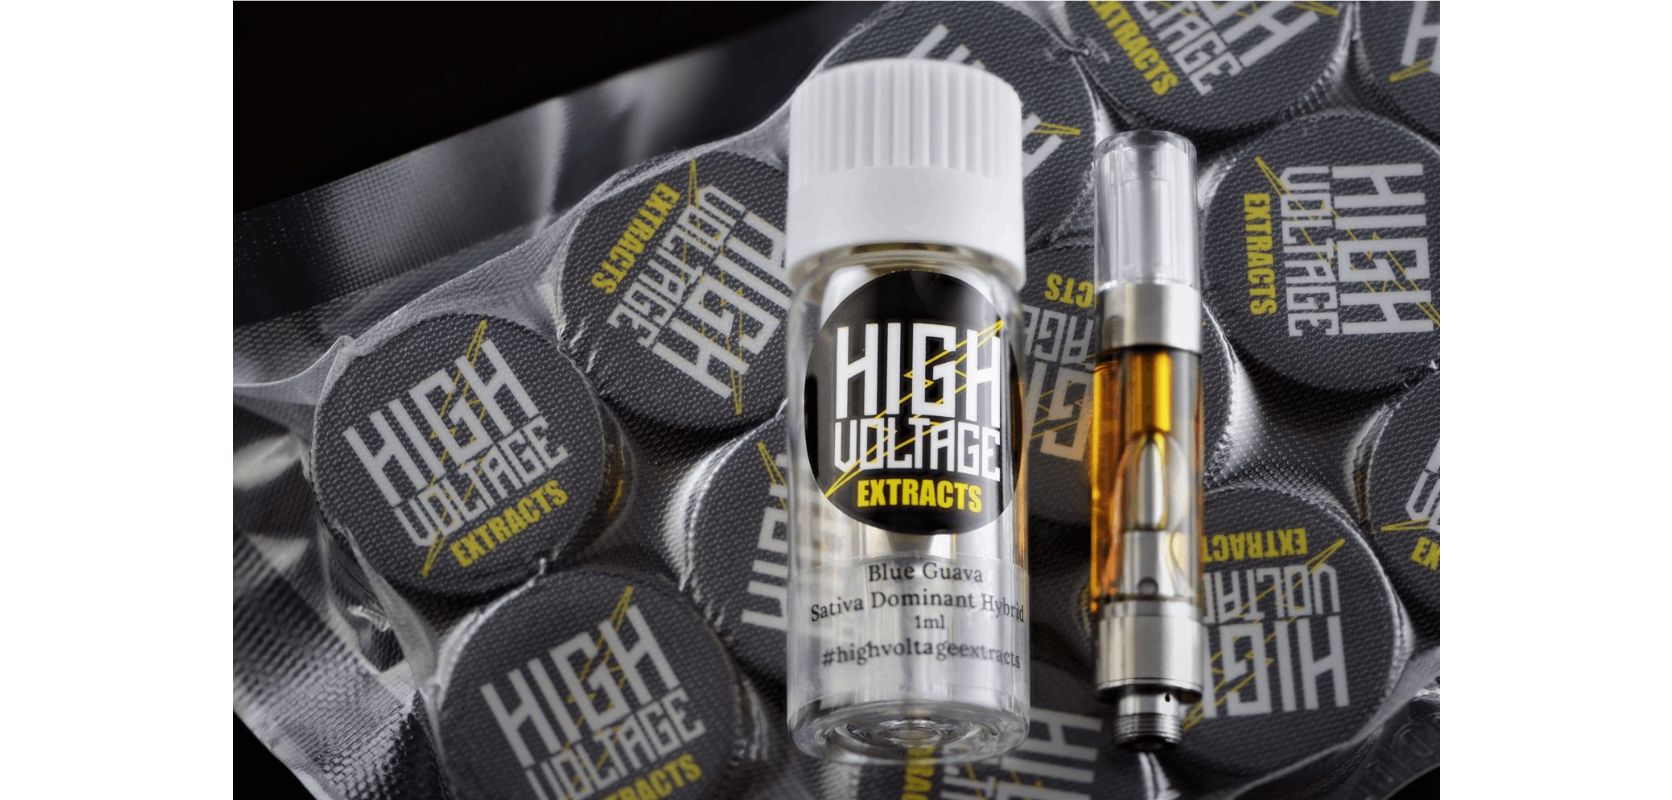 Get this High Voltage Extracts Sauce Refill cart online at LowPriceBud and have it shipped straight to your doorstep anywhere in Canada.